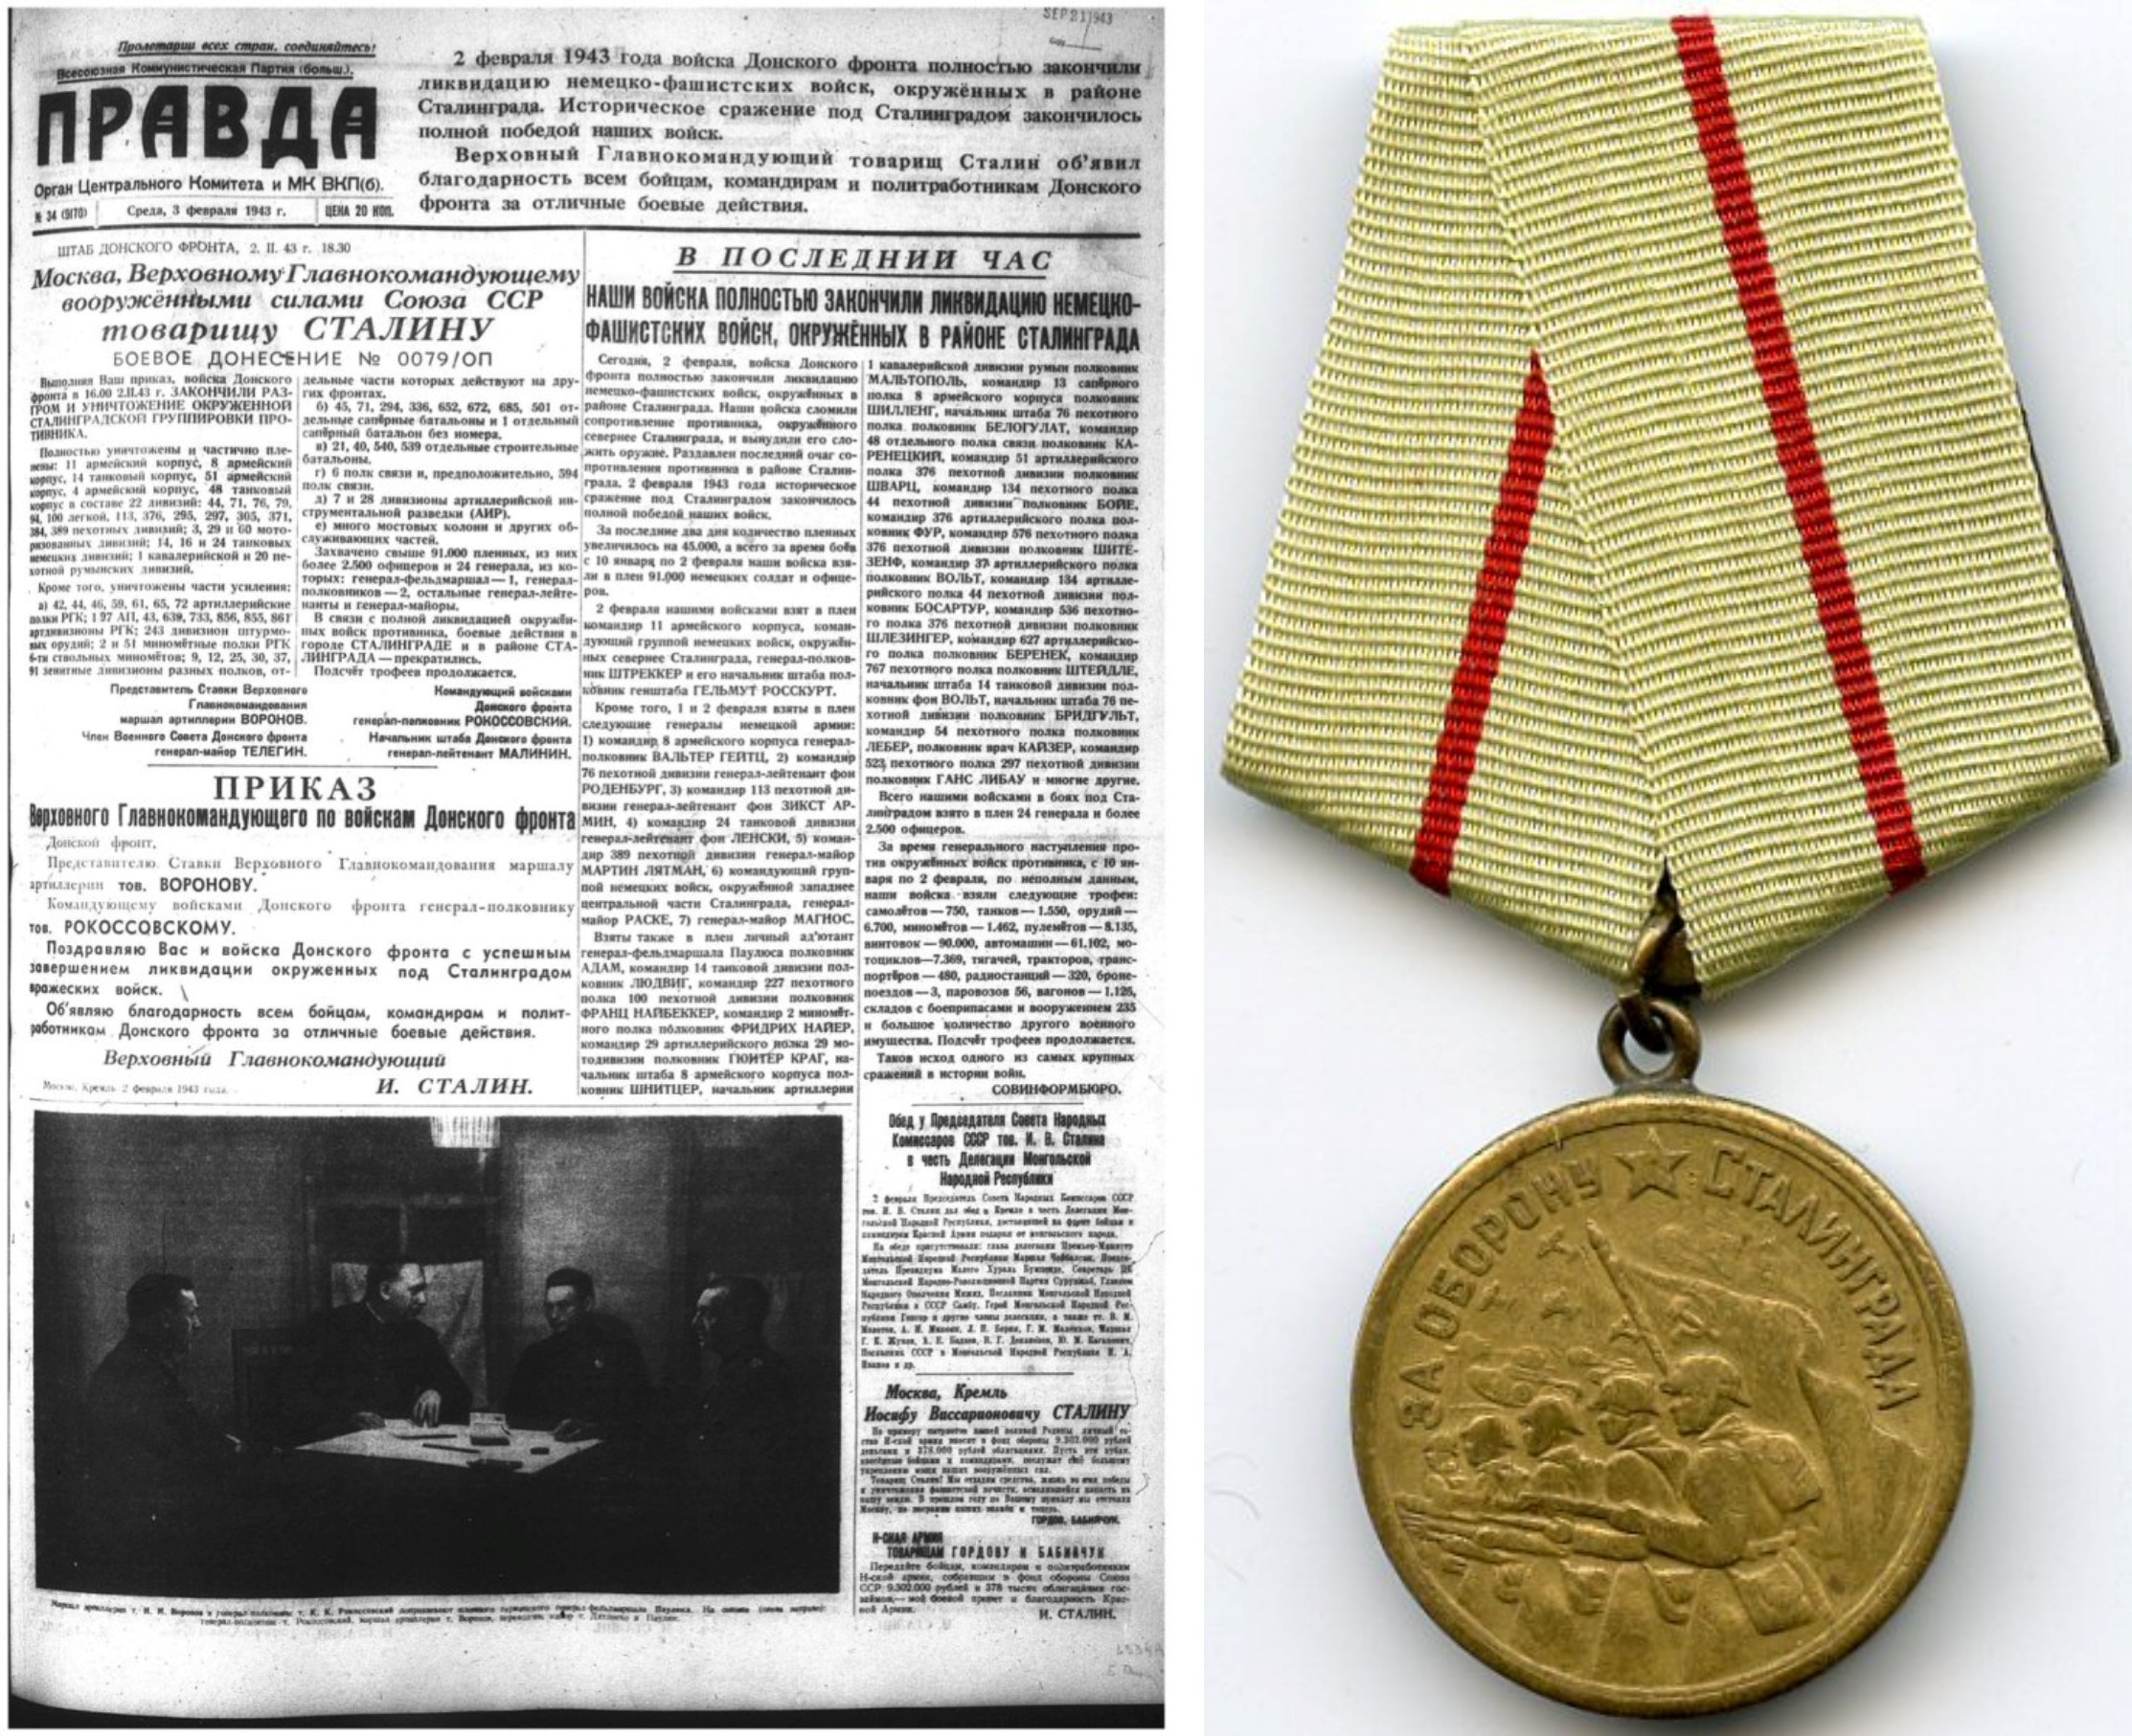 On the left, a newspaper during the Battle of Stalingrad. On the right,  the Medal 'For the Defense of Stalingrad.'